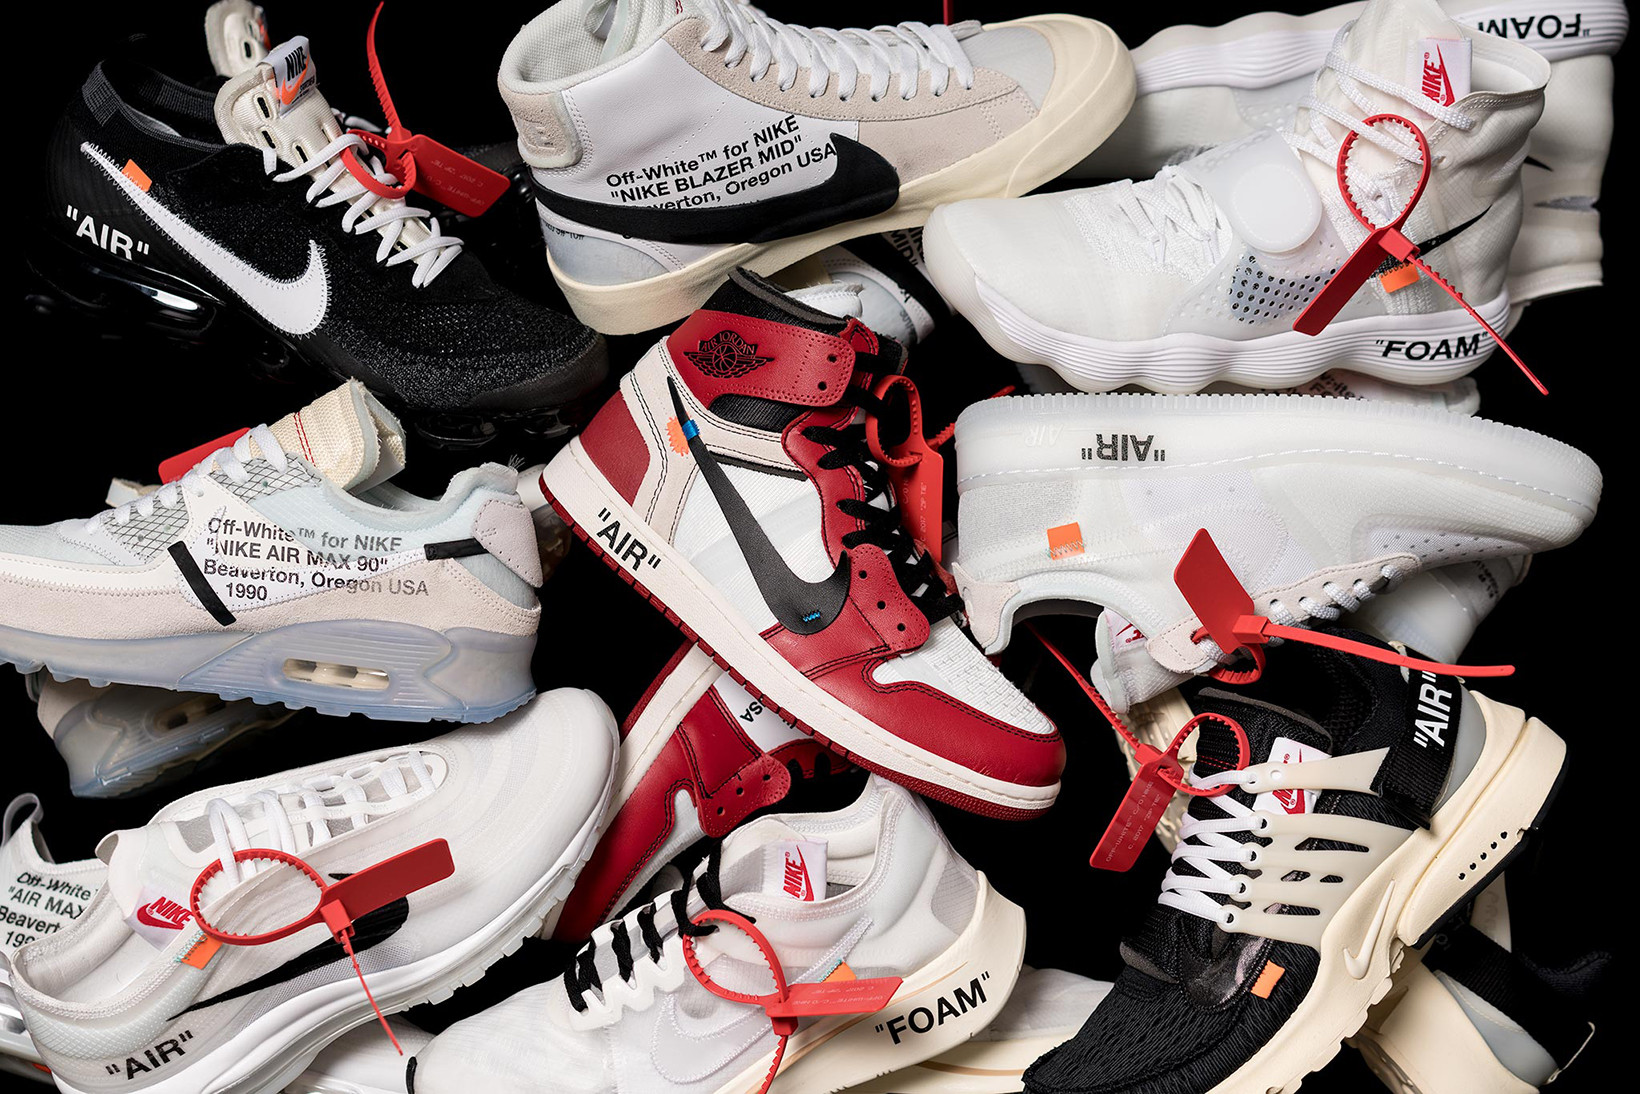 The Full Off-White x Nike "THE TEN" Collection Ranked From Worst Best | The Sole Supplier